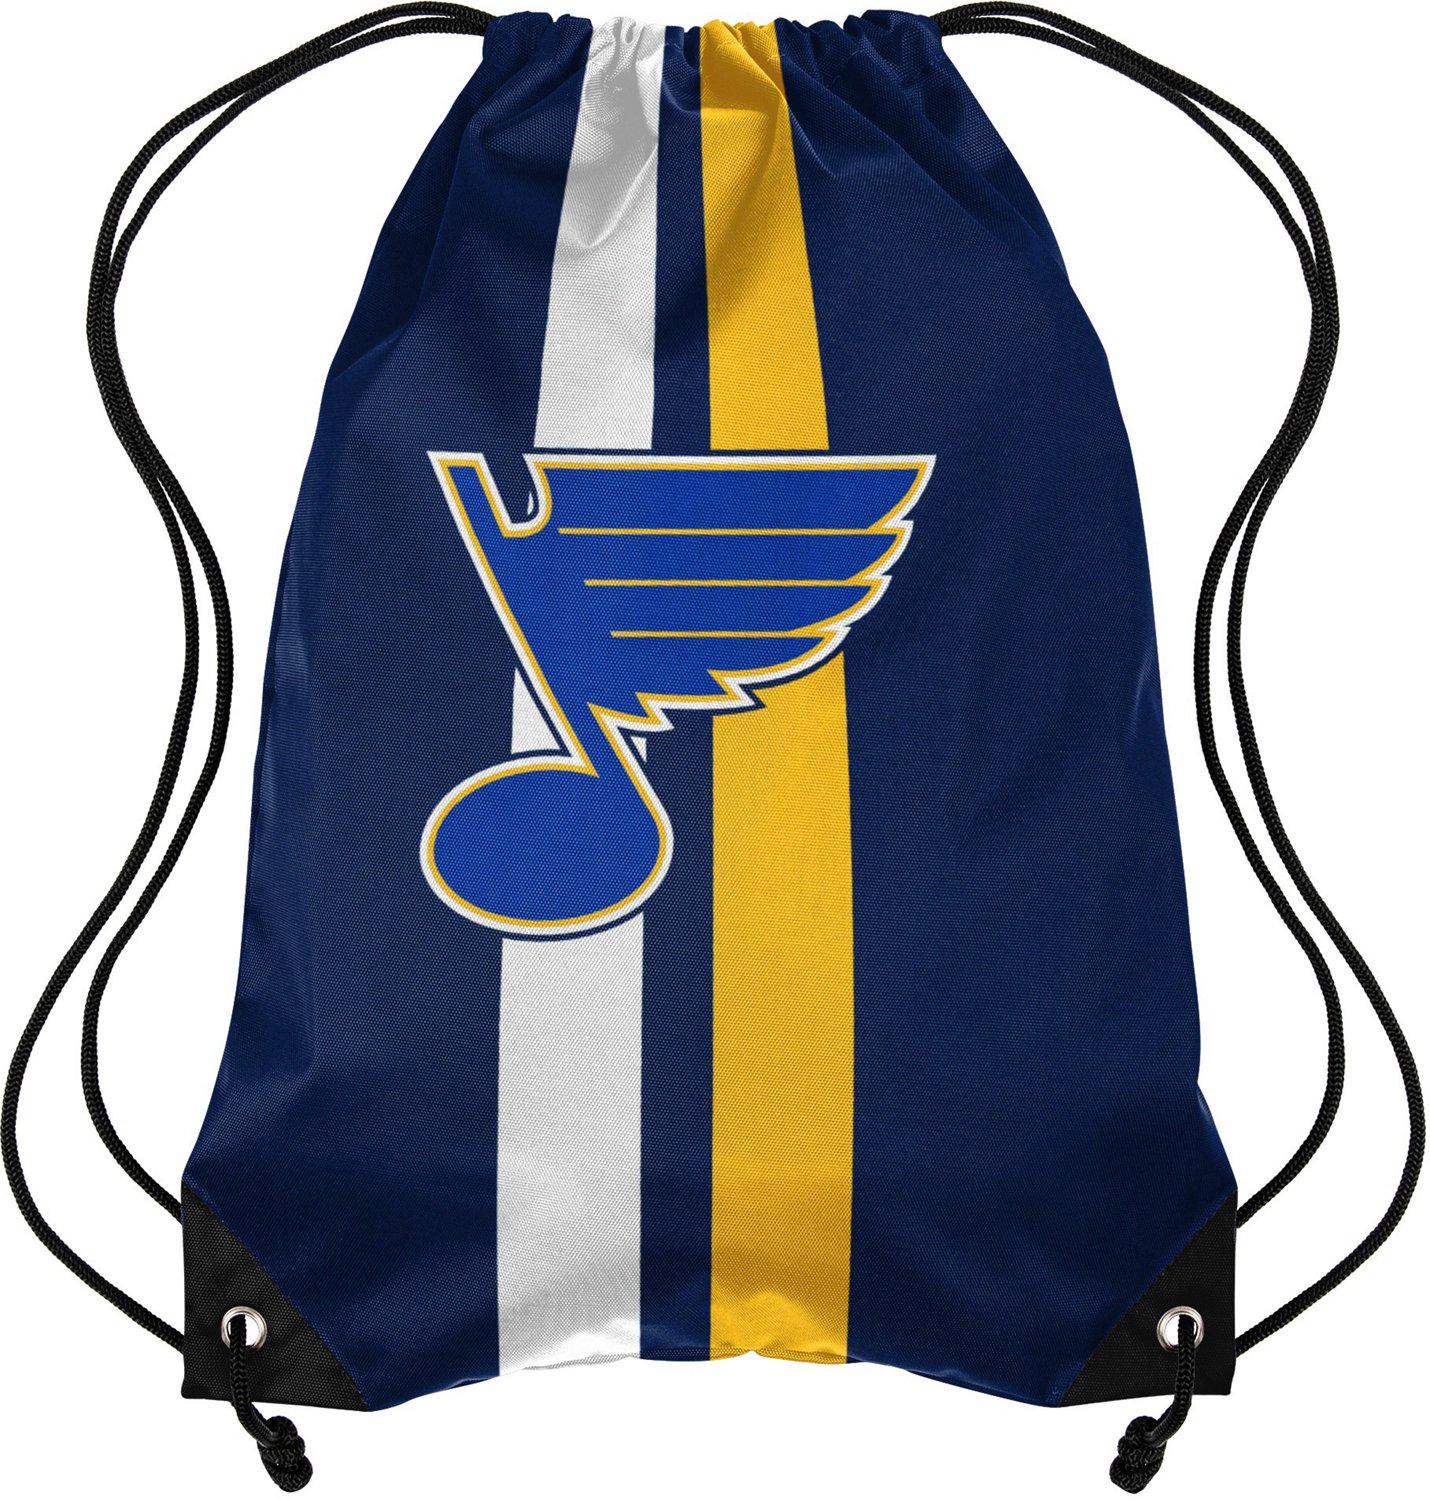 St. Louis Blues Bags, Blues Backpacks, Totes, Luggage, Duffel Bags